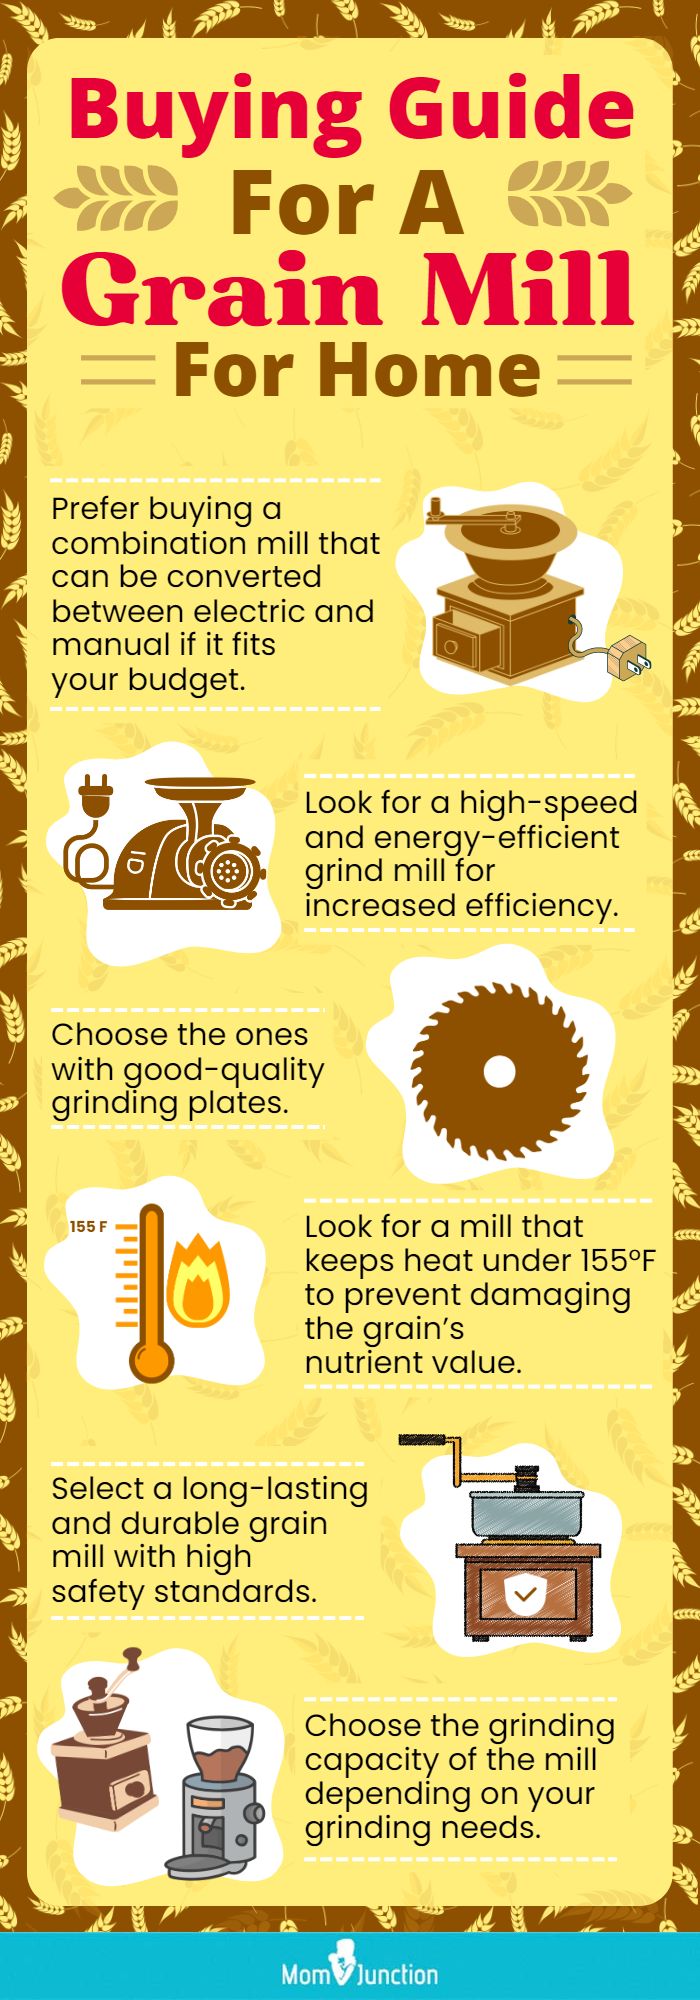 Buying Guide For A Grain Mill For Home (infographic)